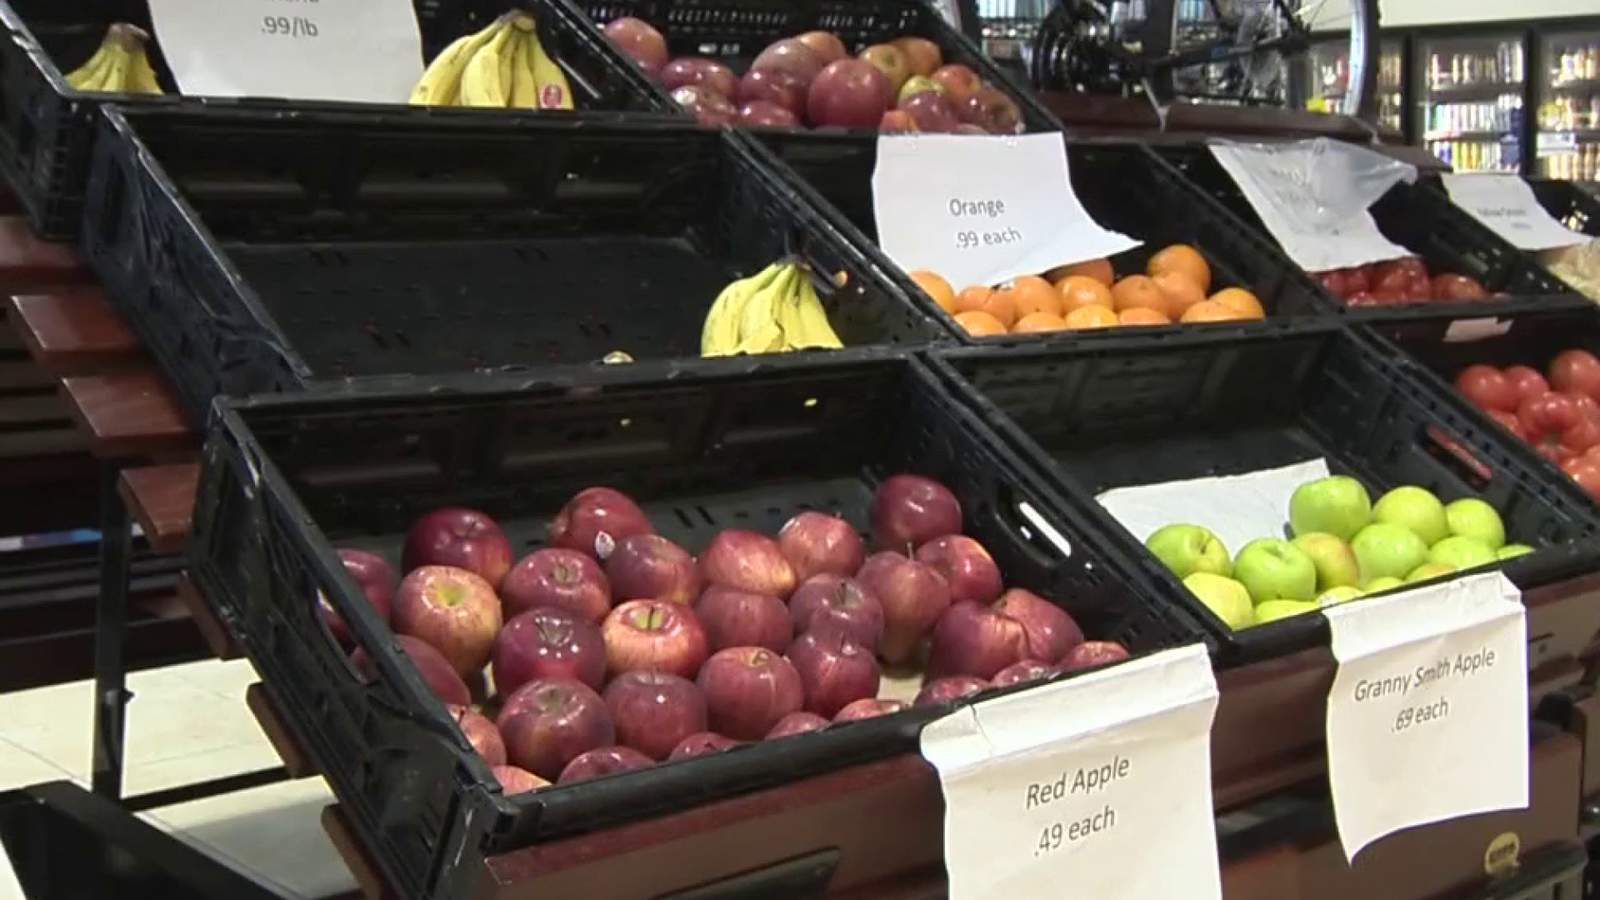 City Council is tackling food deserts by increasing access to fresh fruit, vegetables